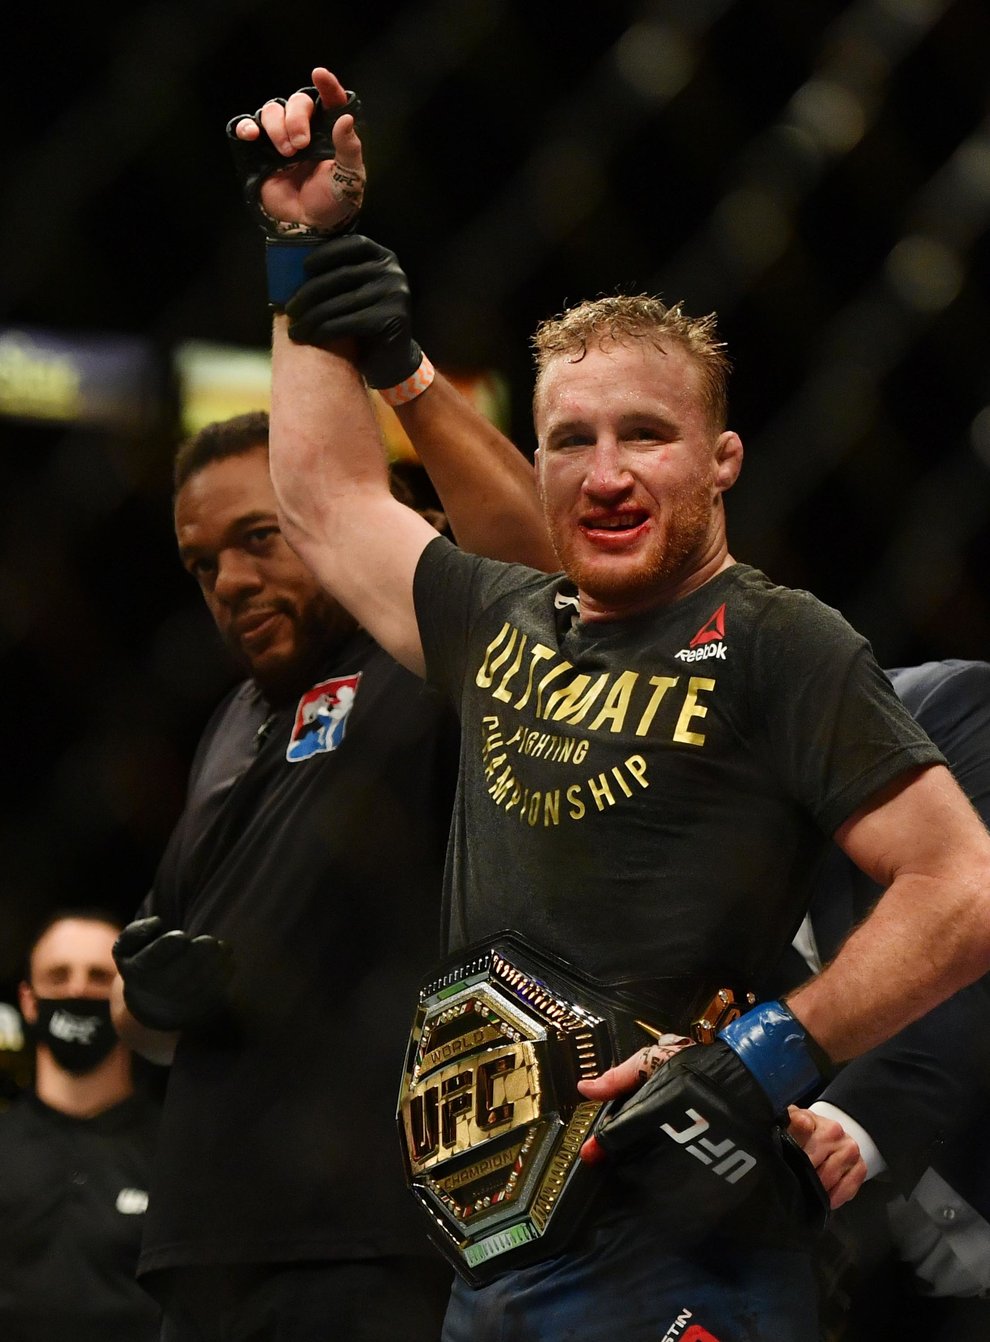 Gaethje put on a scintillating display to beat Ferguson at UFC 249 (PA Images)